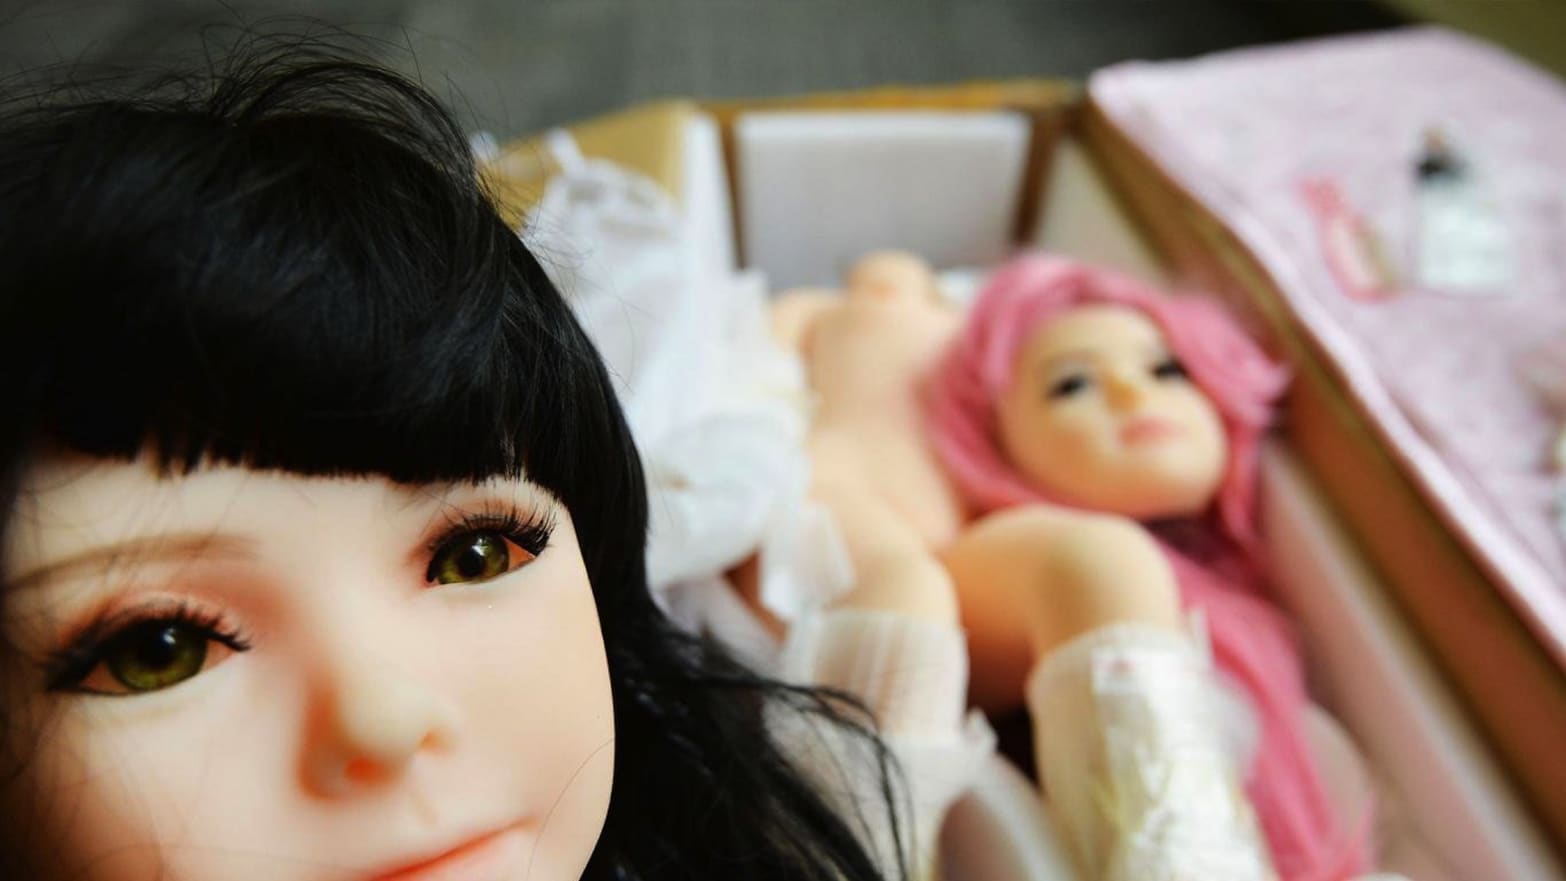 Toddler Sex Abuse Porn - Child Sex Robots Are Coming to America. Can We Stop Them ...